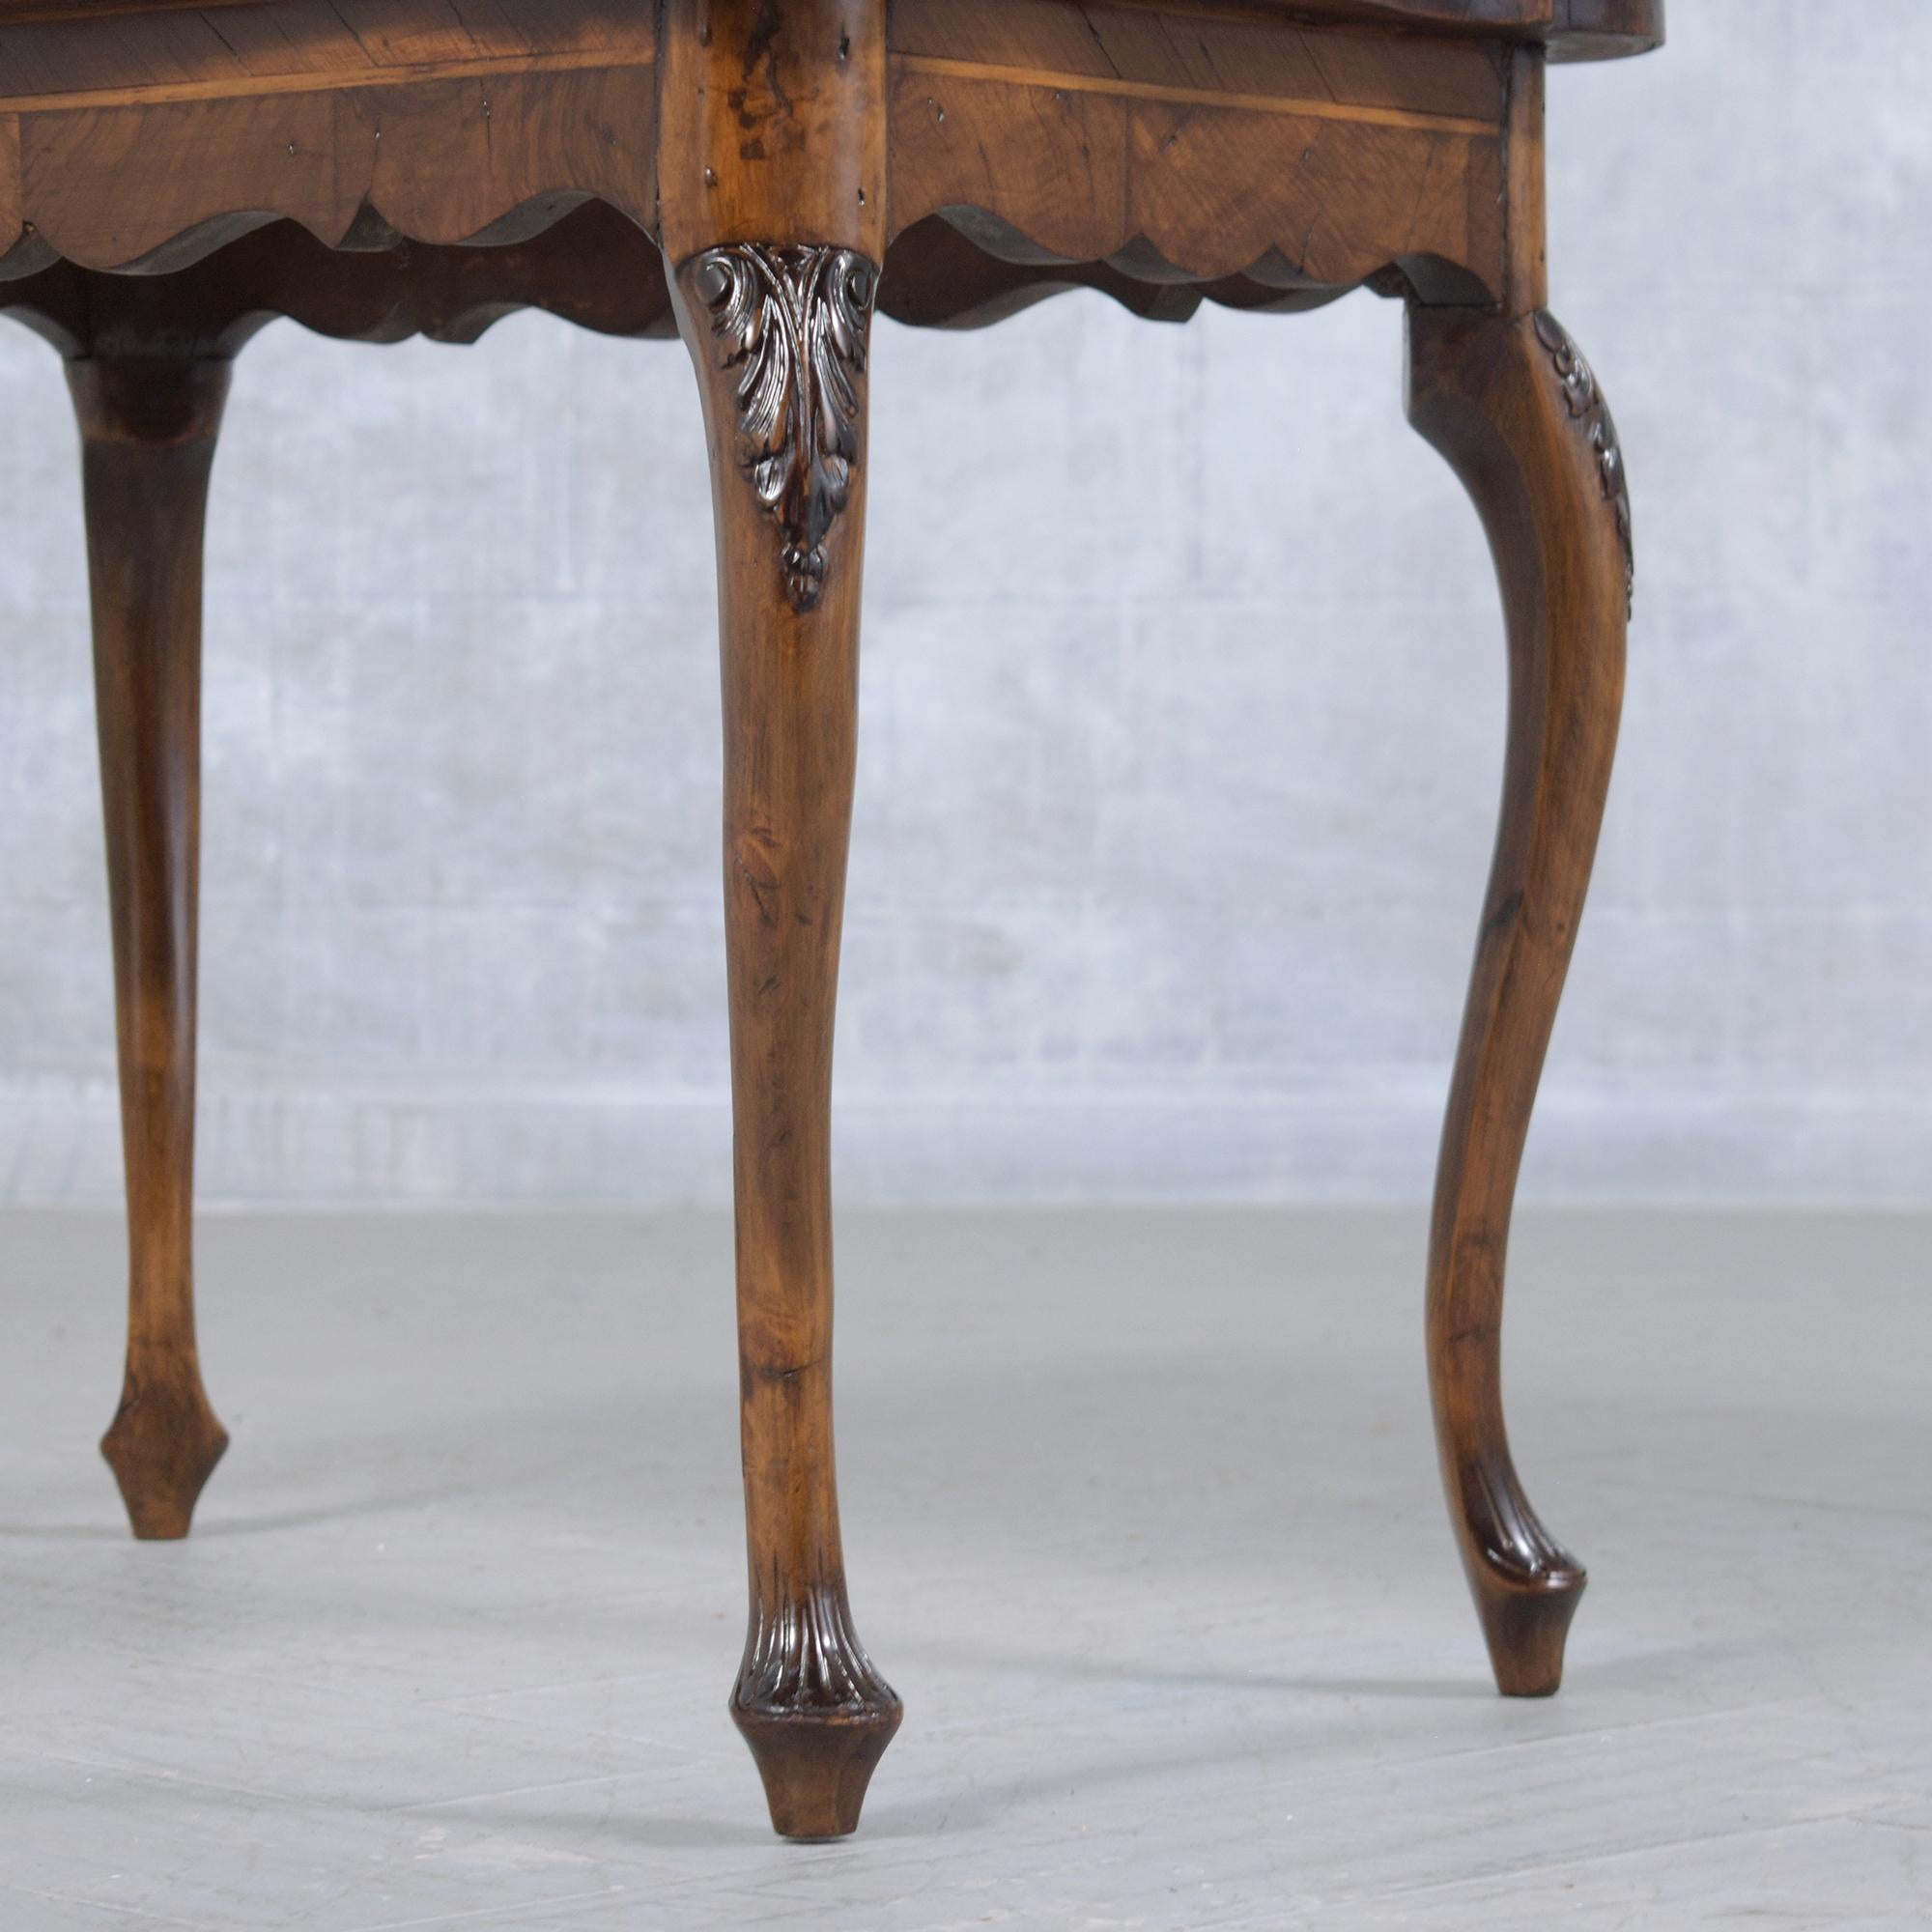 Late 19th-Century English Walnut Side Table with Inlaid Pattern For Sale 4